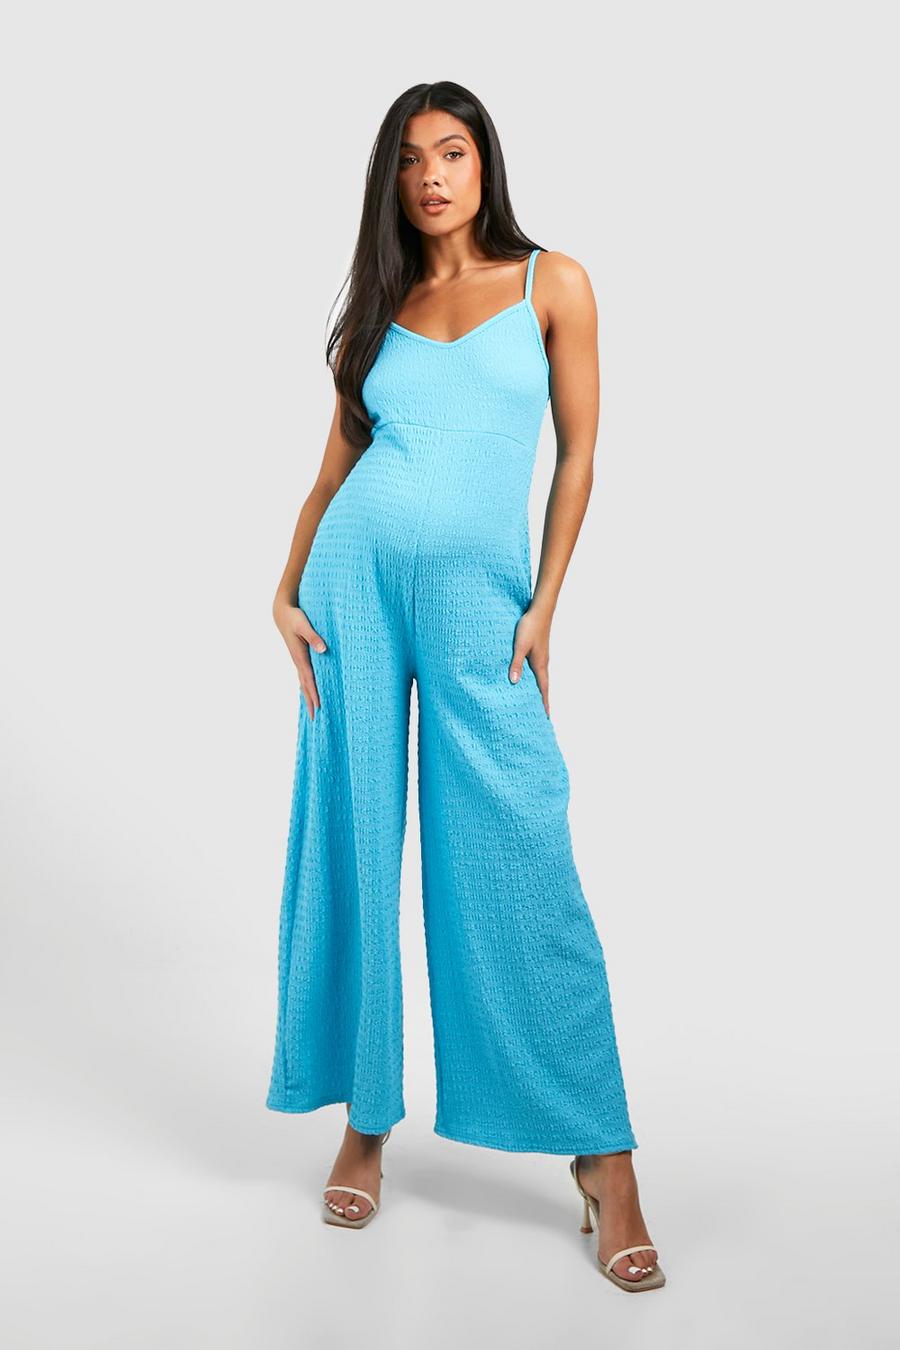 Turquoise blue Maternity Textured Culotte Jumpsuit